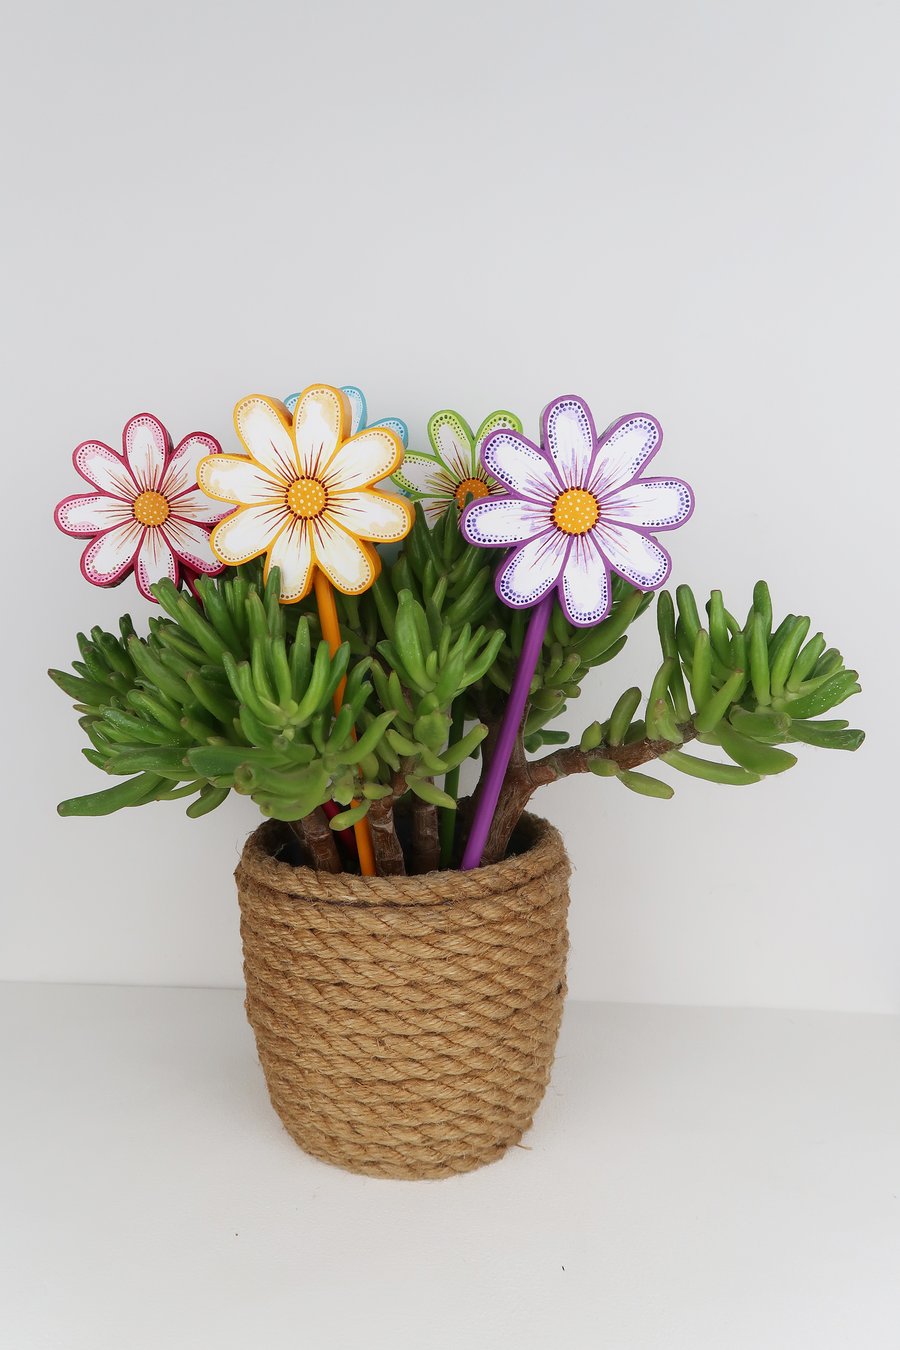 Daisy plant stake, wooden flower pot ornament, plant lover gift